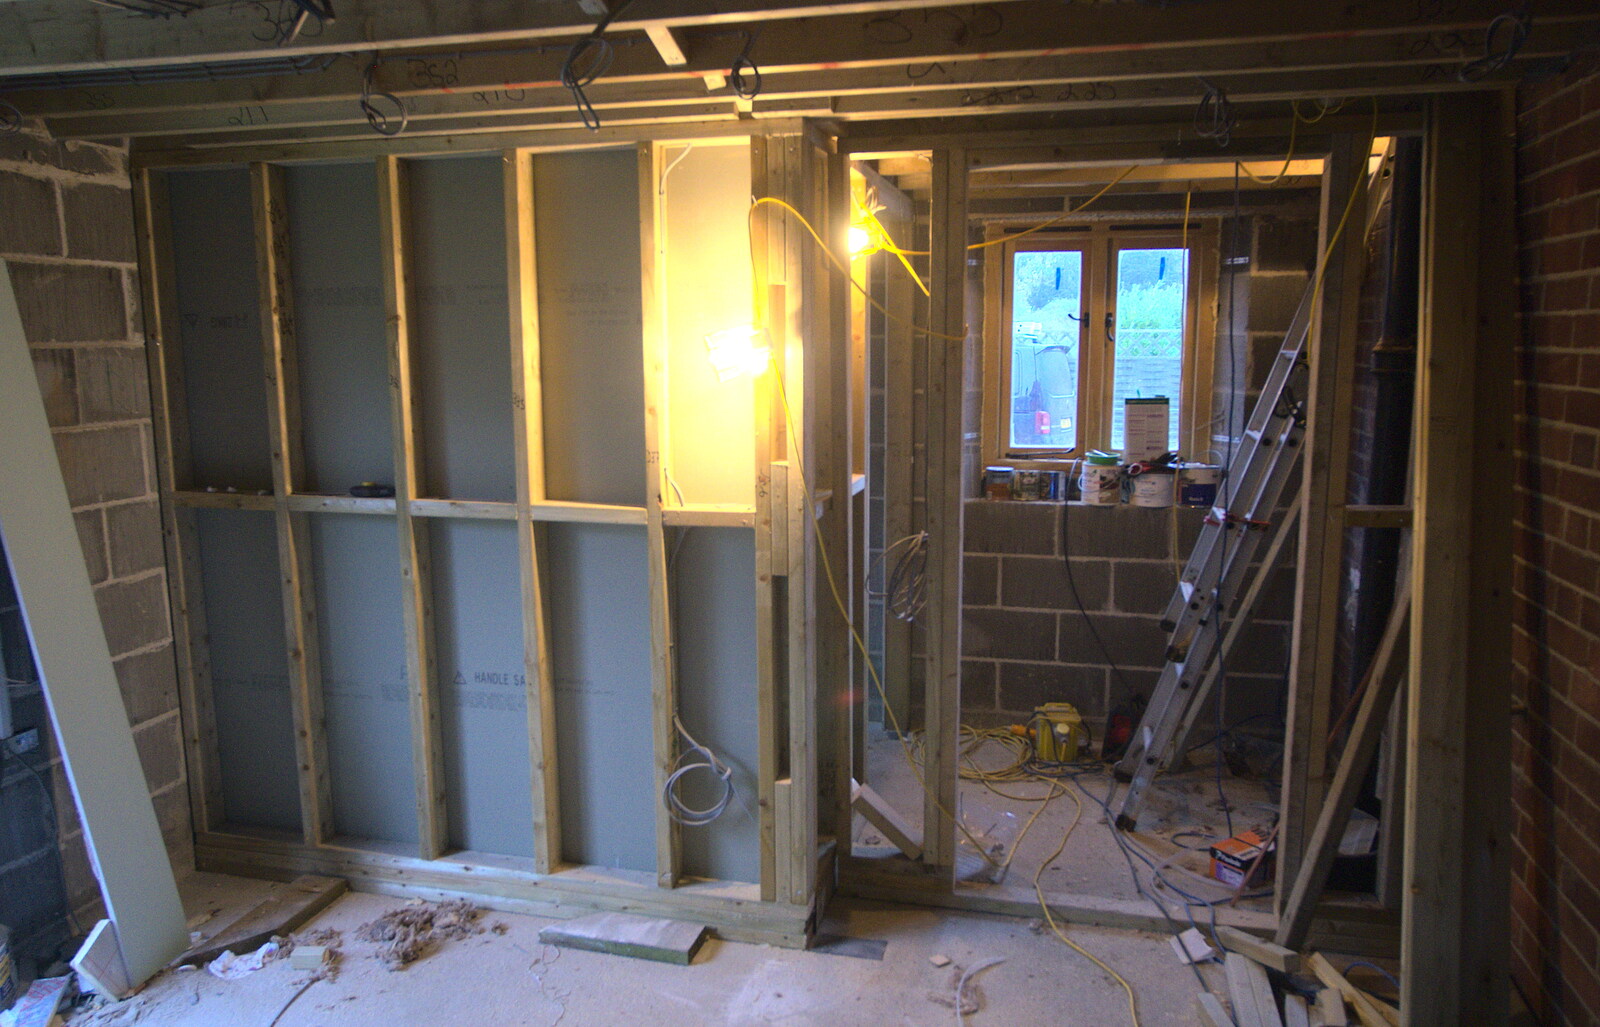 A partition wall in progress from Hot-tub Penthouse, Thornham Walks, and Building, London and Suffolk - 12th November 2015